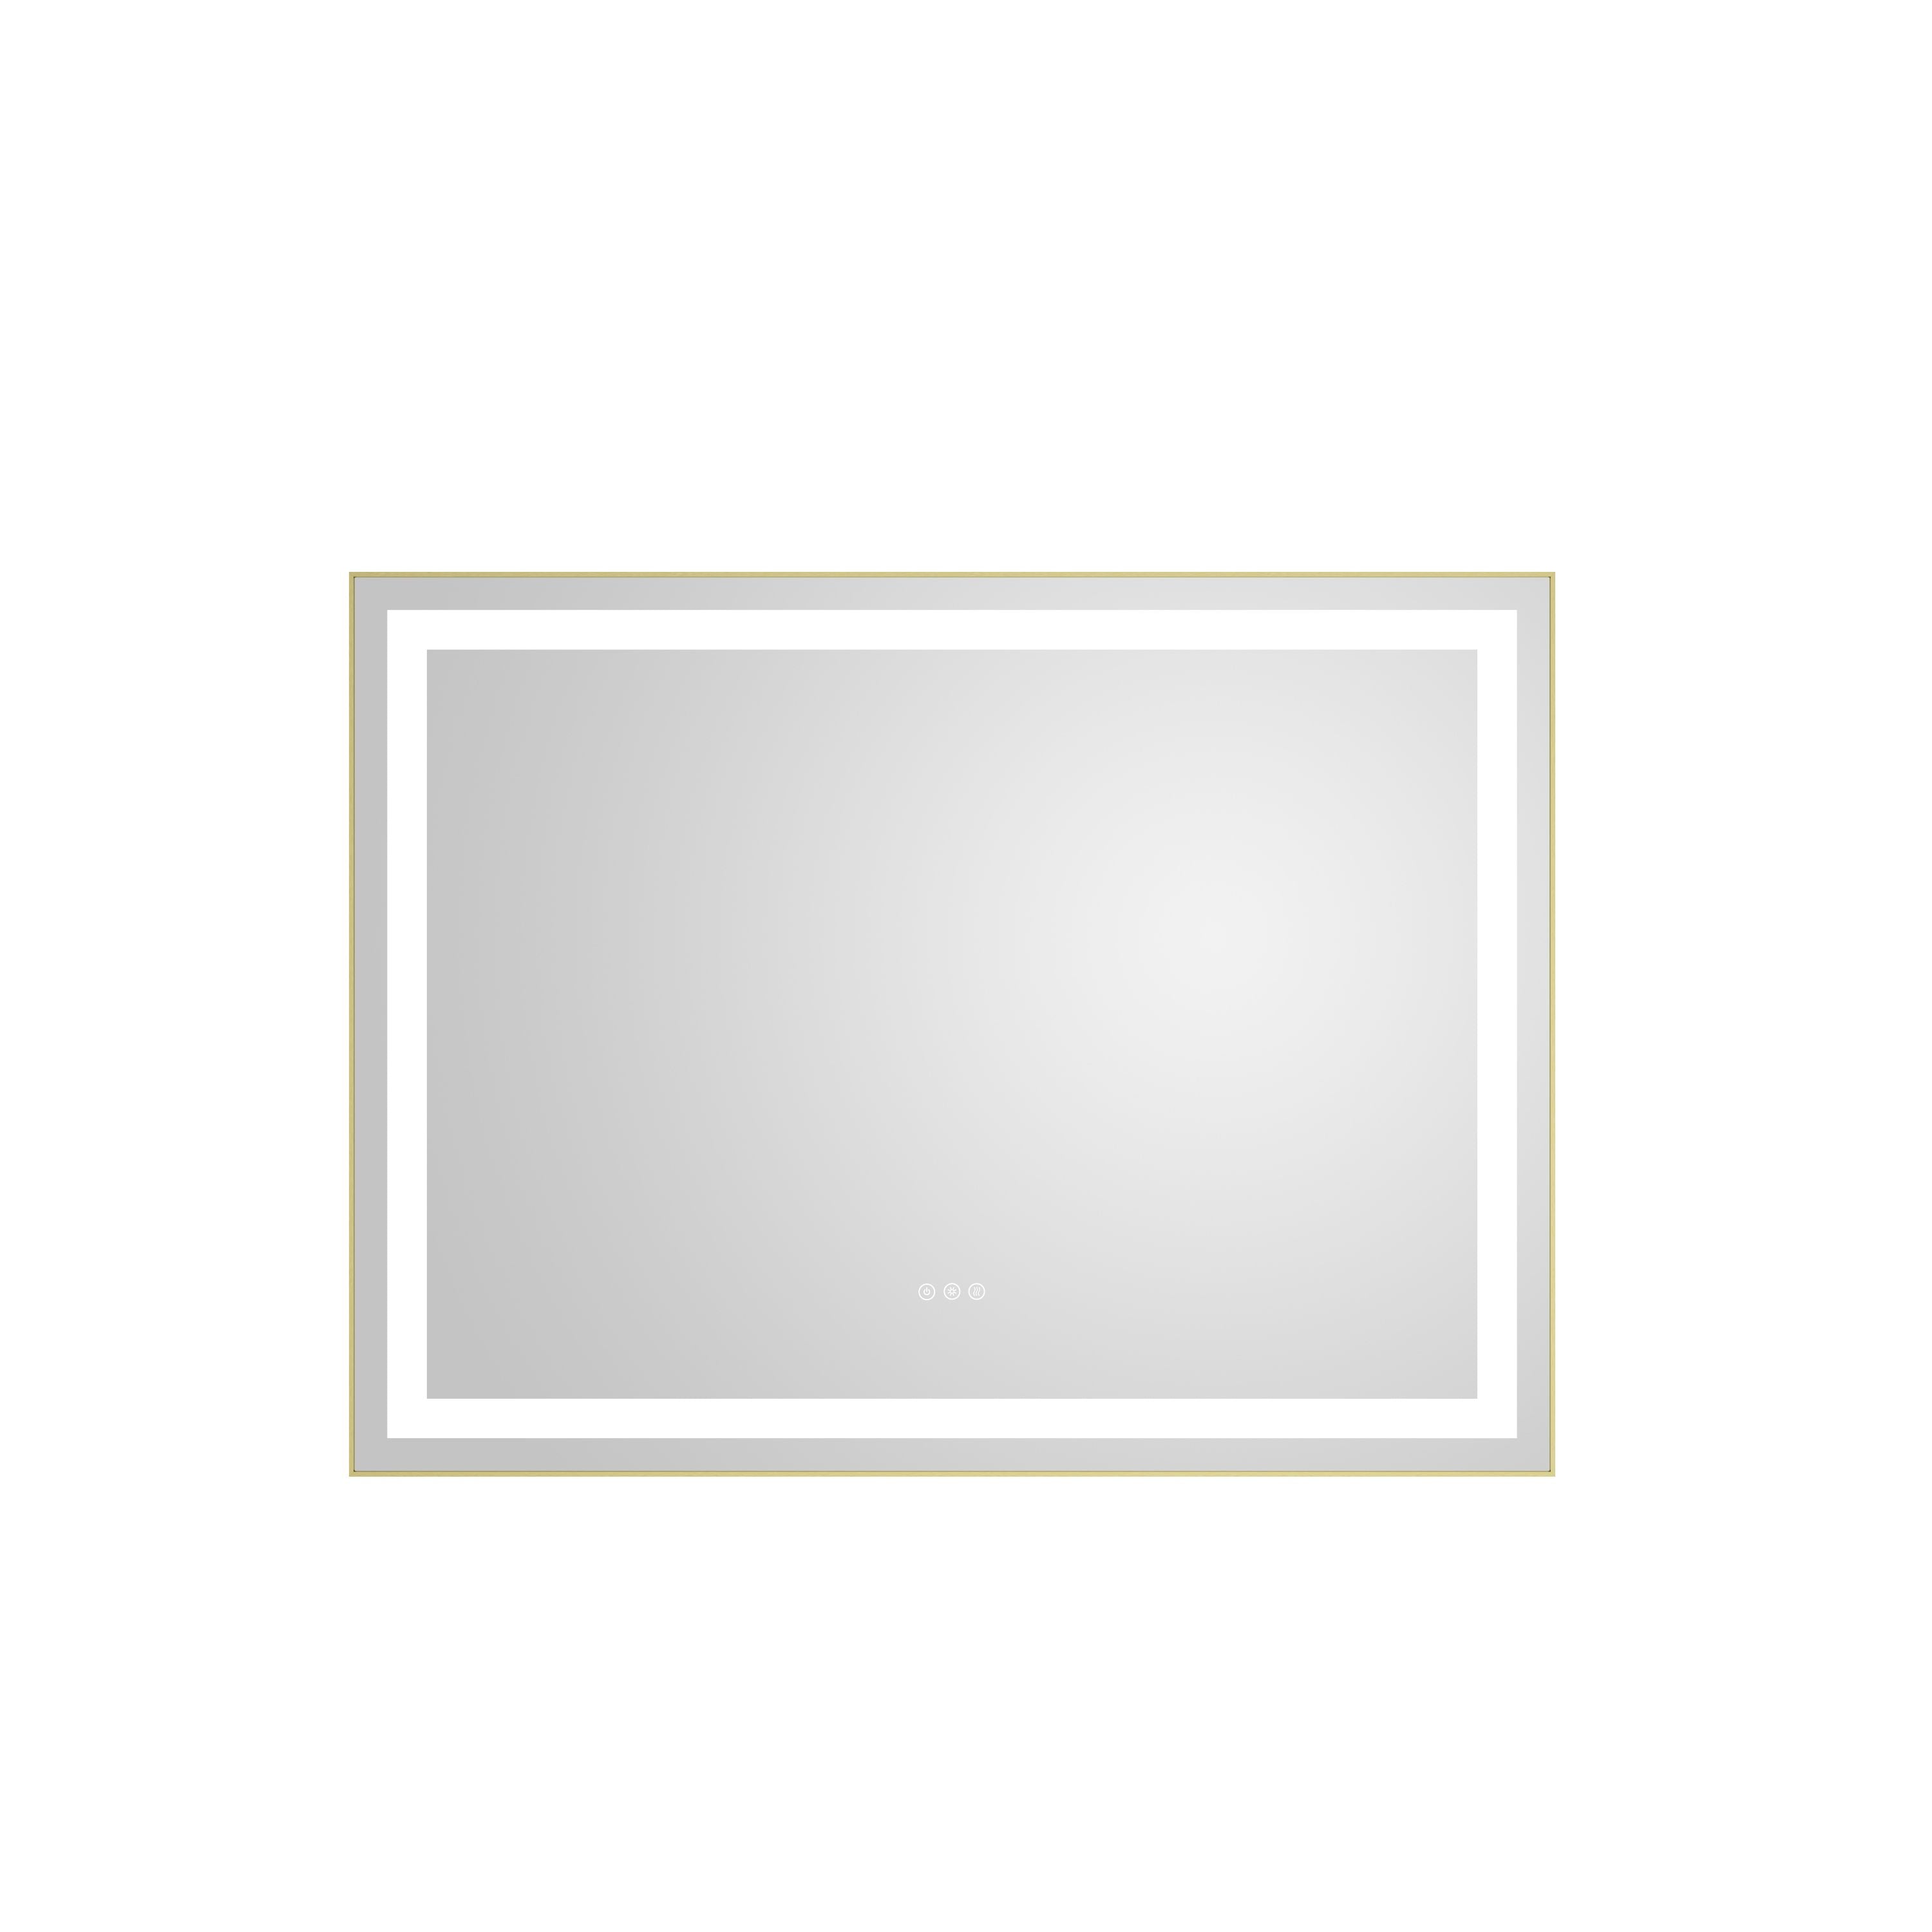 48 in. W x 36 in. H Framed LED Lighted Bathroom Wall Mounted Mirror with High Lumen+Anti-Fog Separately Control